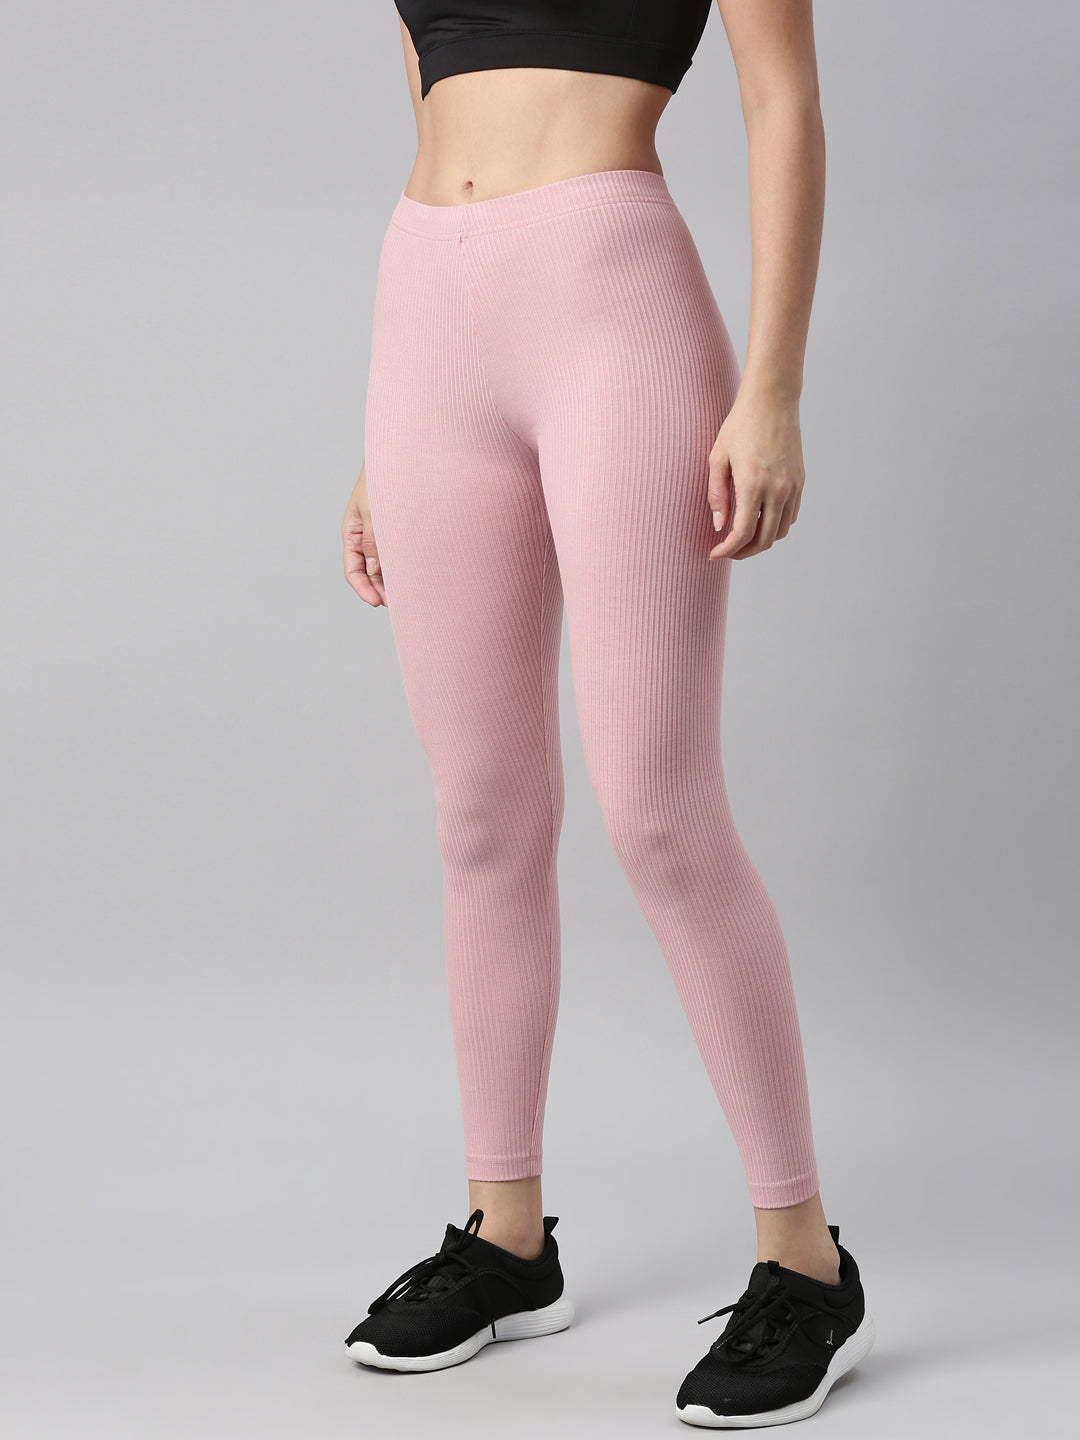 Year of Ours Women's Ribbed Yoga Clothing